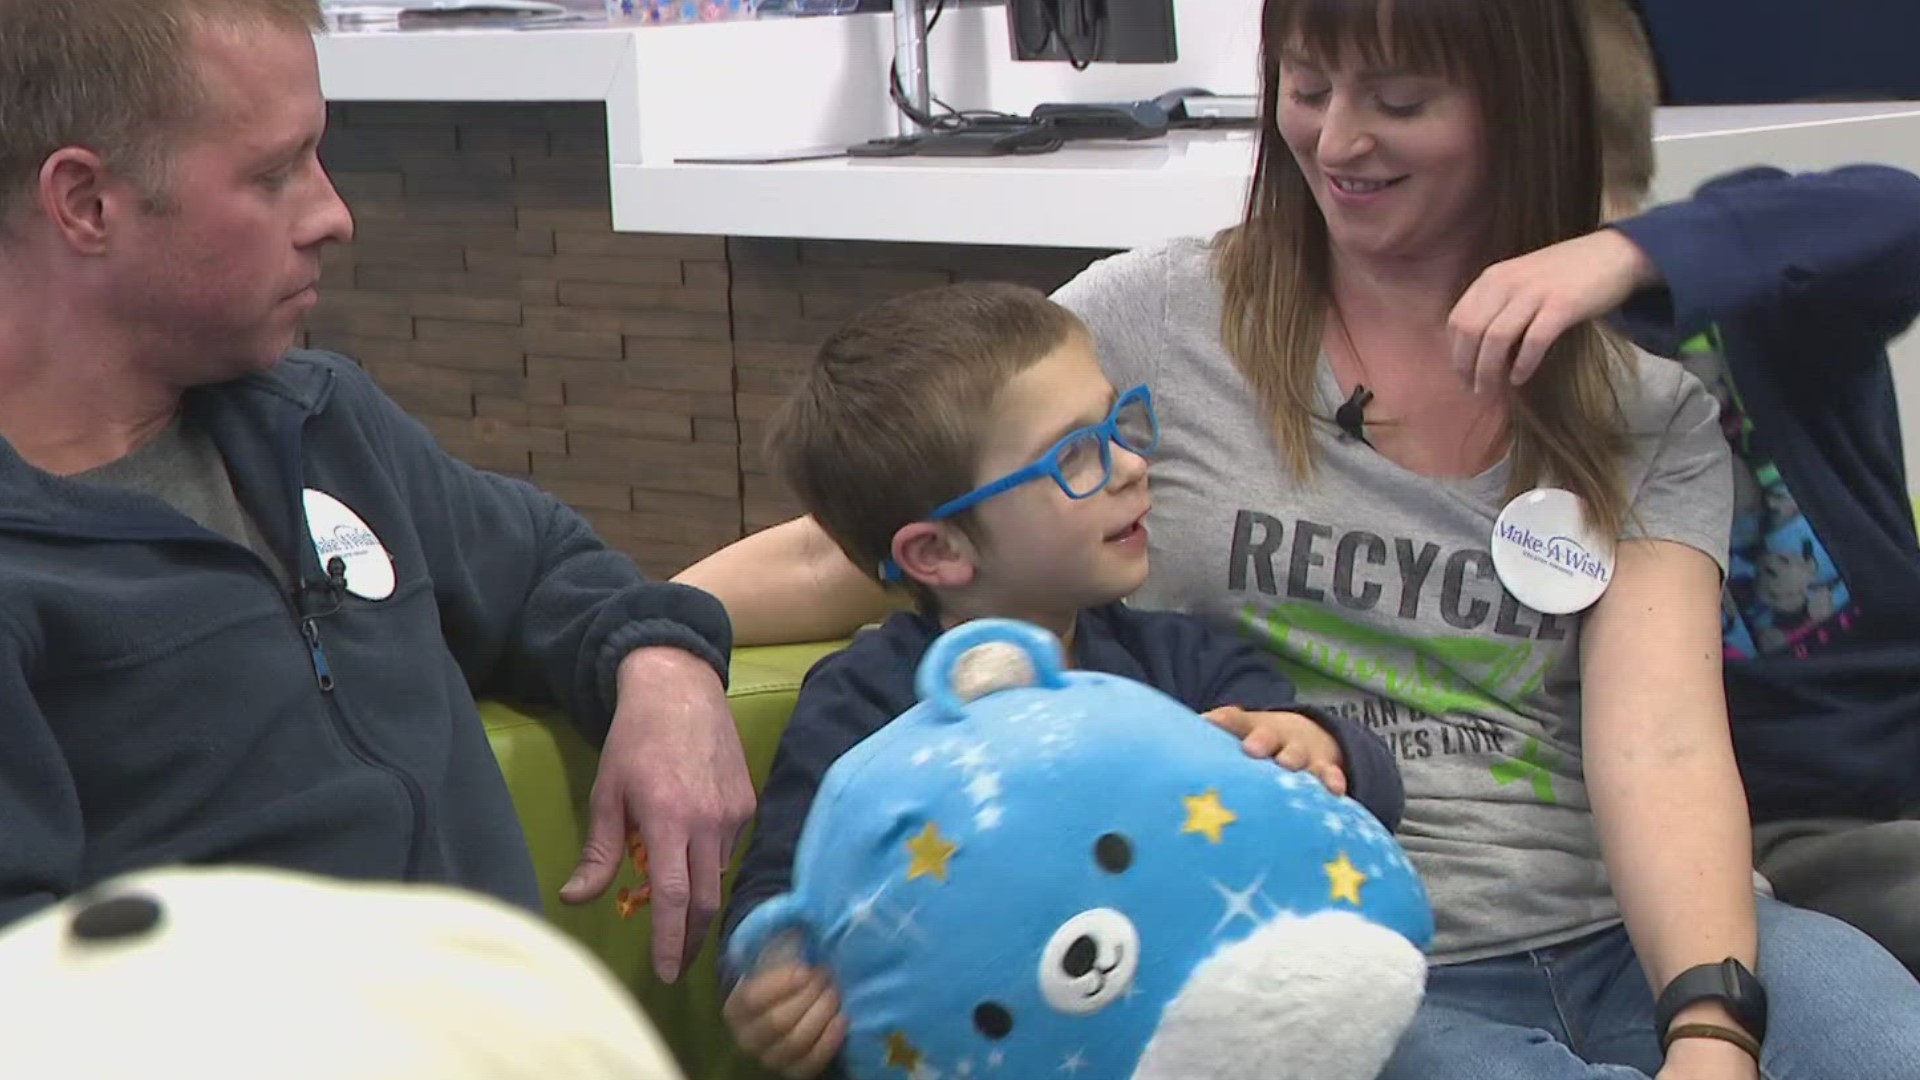 A wish has been granted for a six-year-old boy in Suffolk. Joshua recently had a kidney transplant.